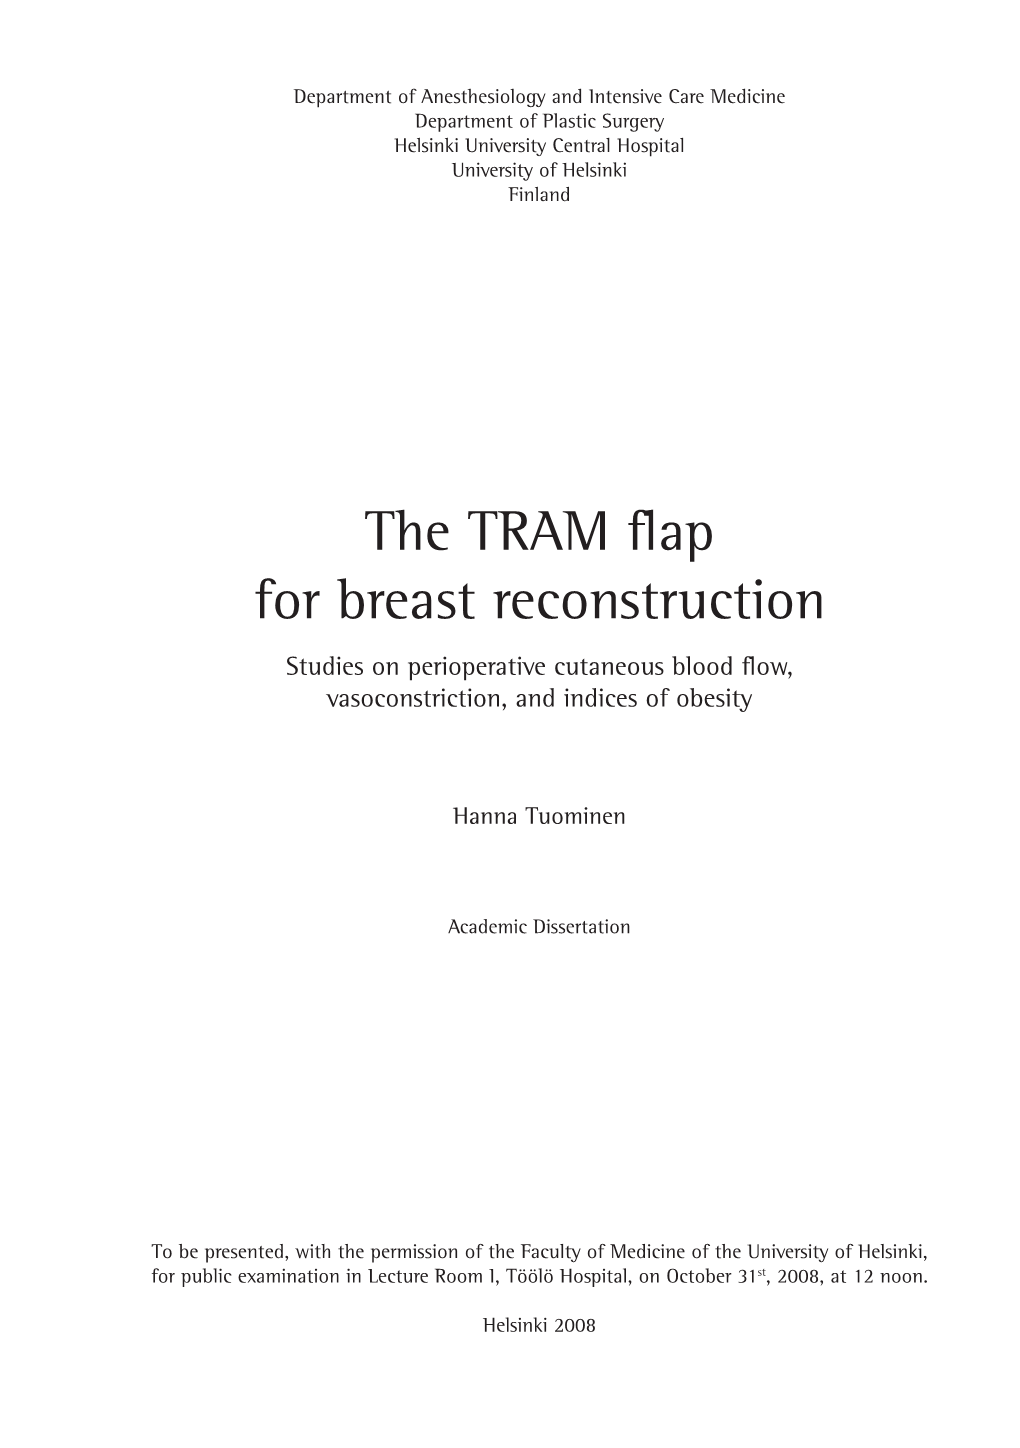 The TRAM Flap for Breast Reconstruction. Studies on Perioperative Cutaneous Blood Flow, Vasoconstriction, and Indices of Obesity